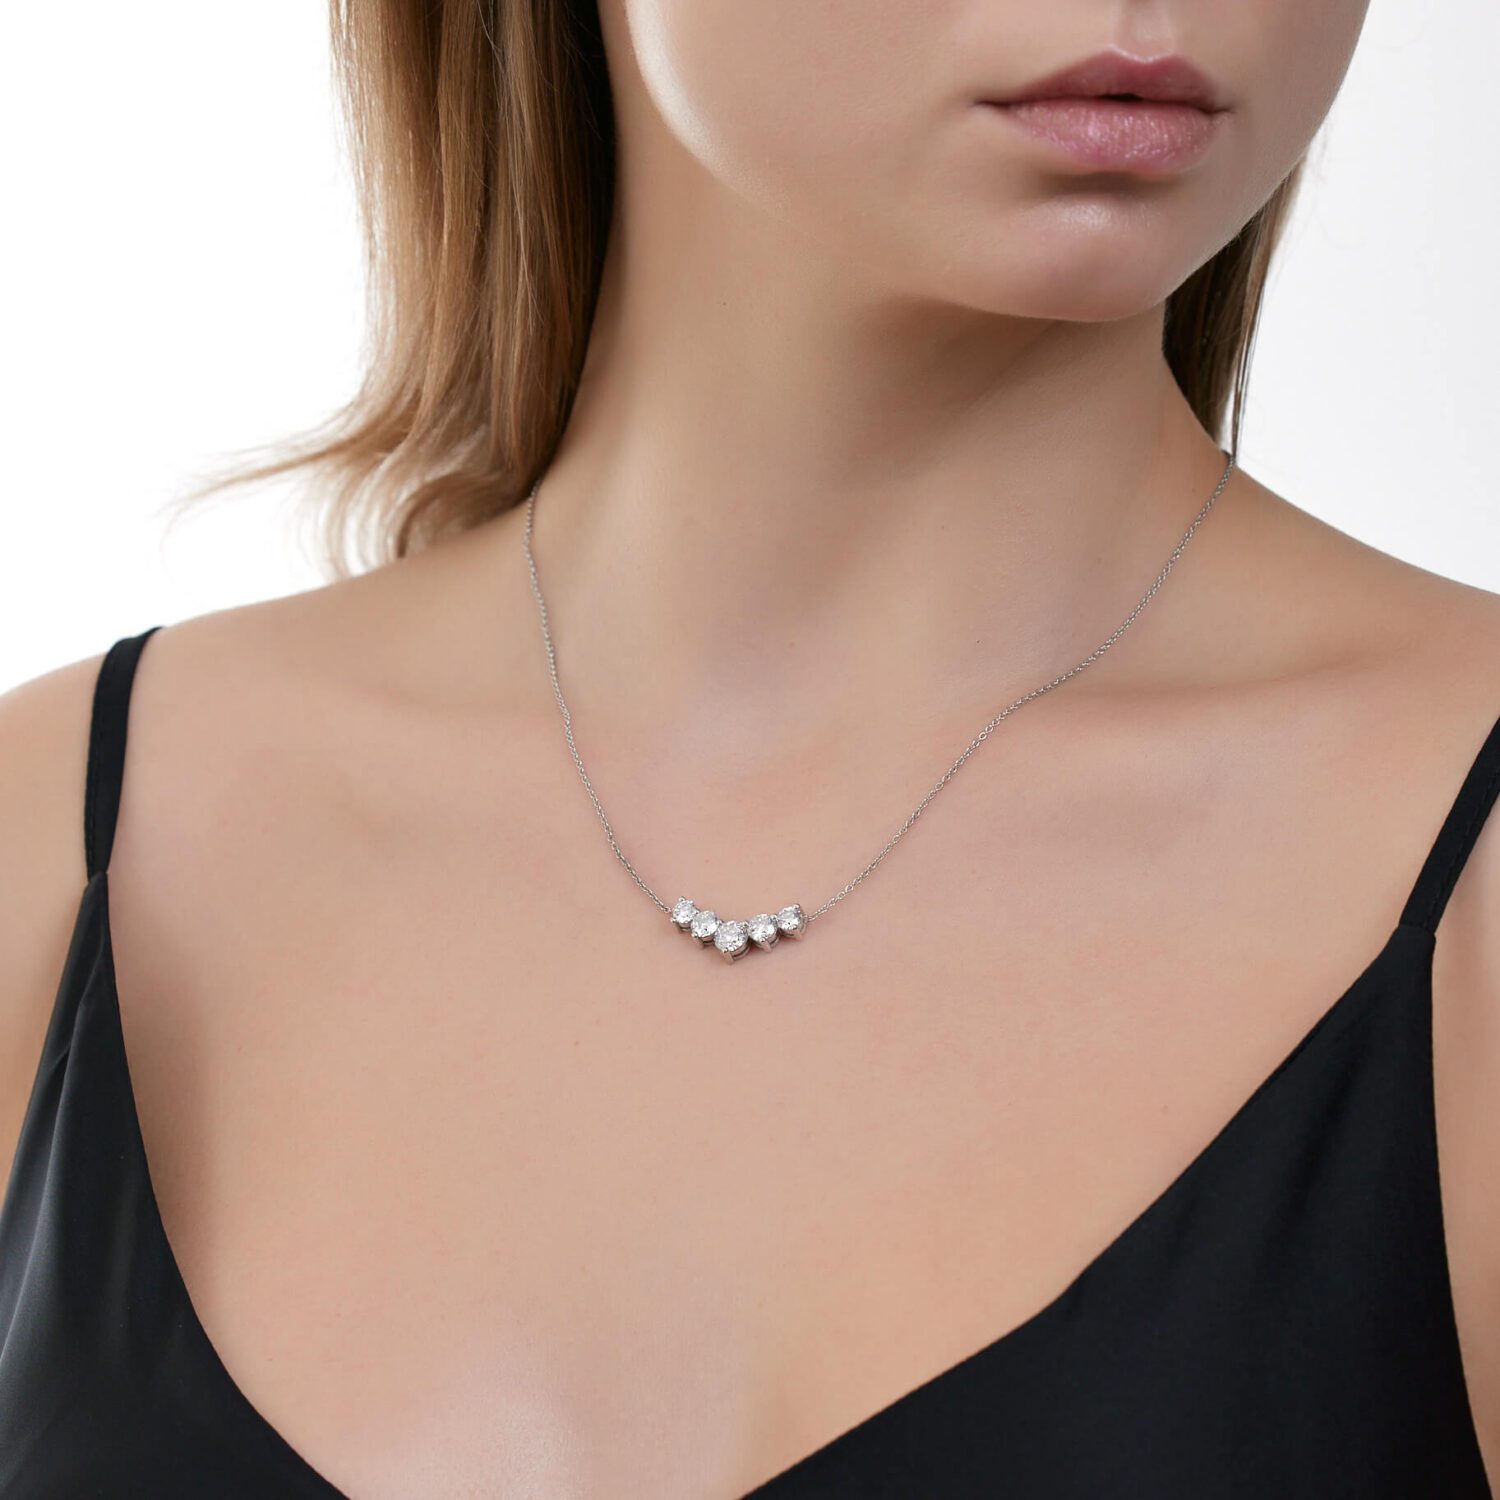 Lab grown diamonds in Cyprus - 5 Stones Necklace best quality and price